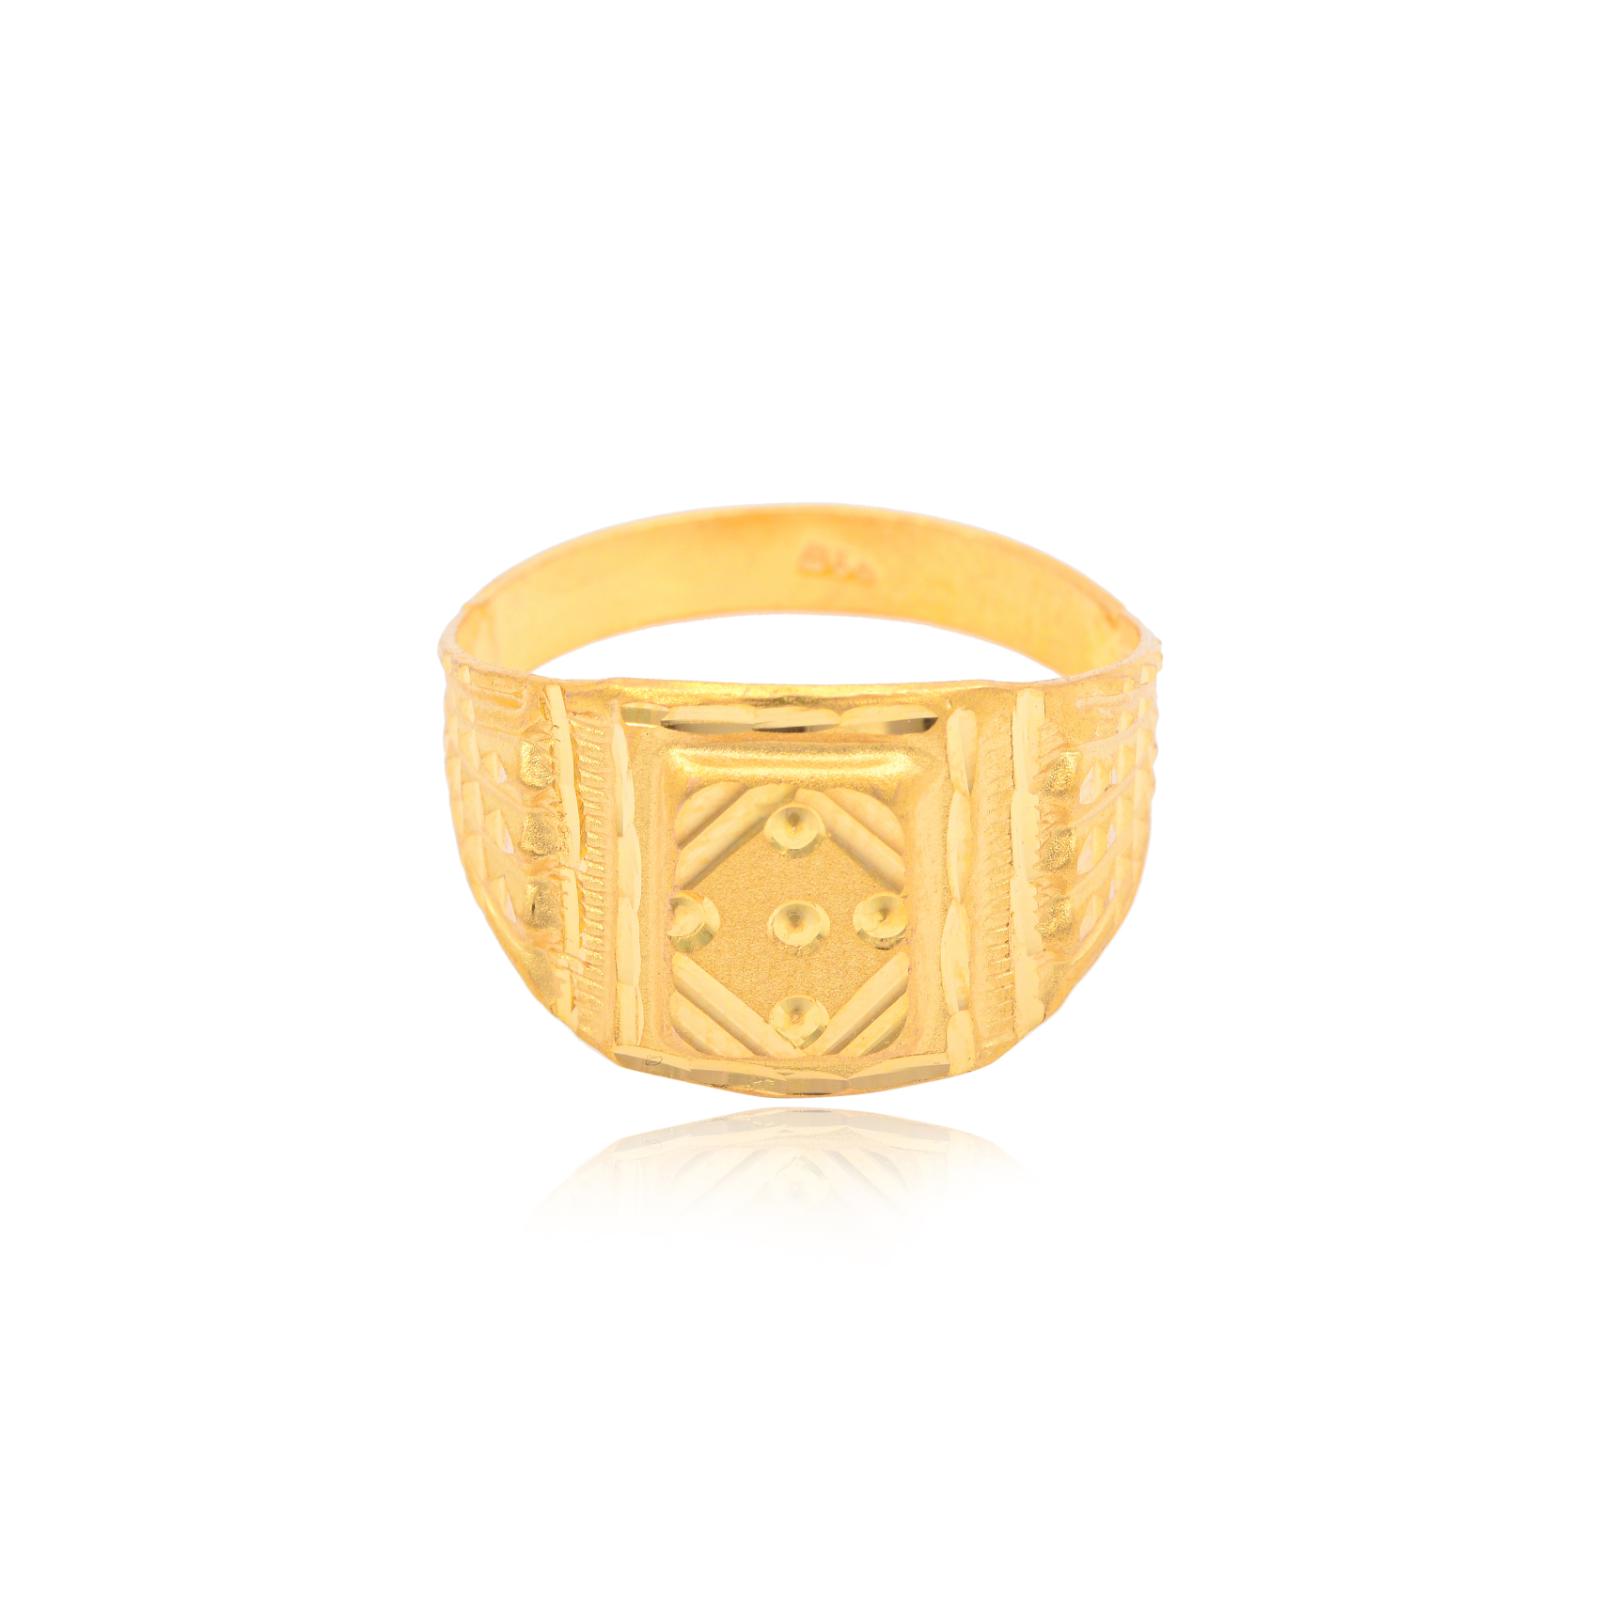 Men's Rings Crafted from 22kt Gold - Bafleh Jewellery